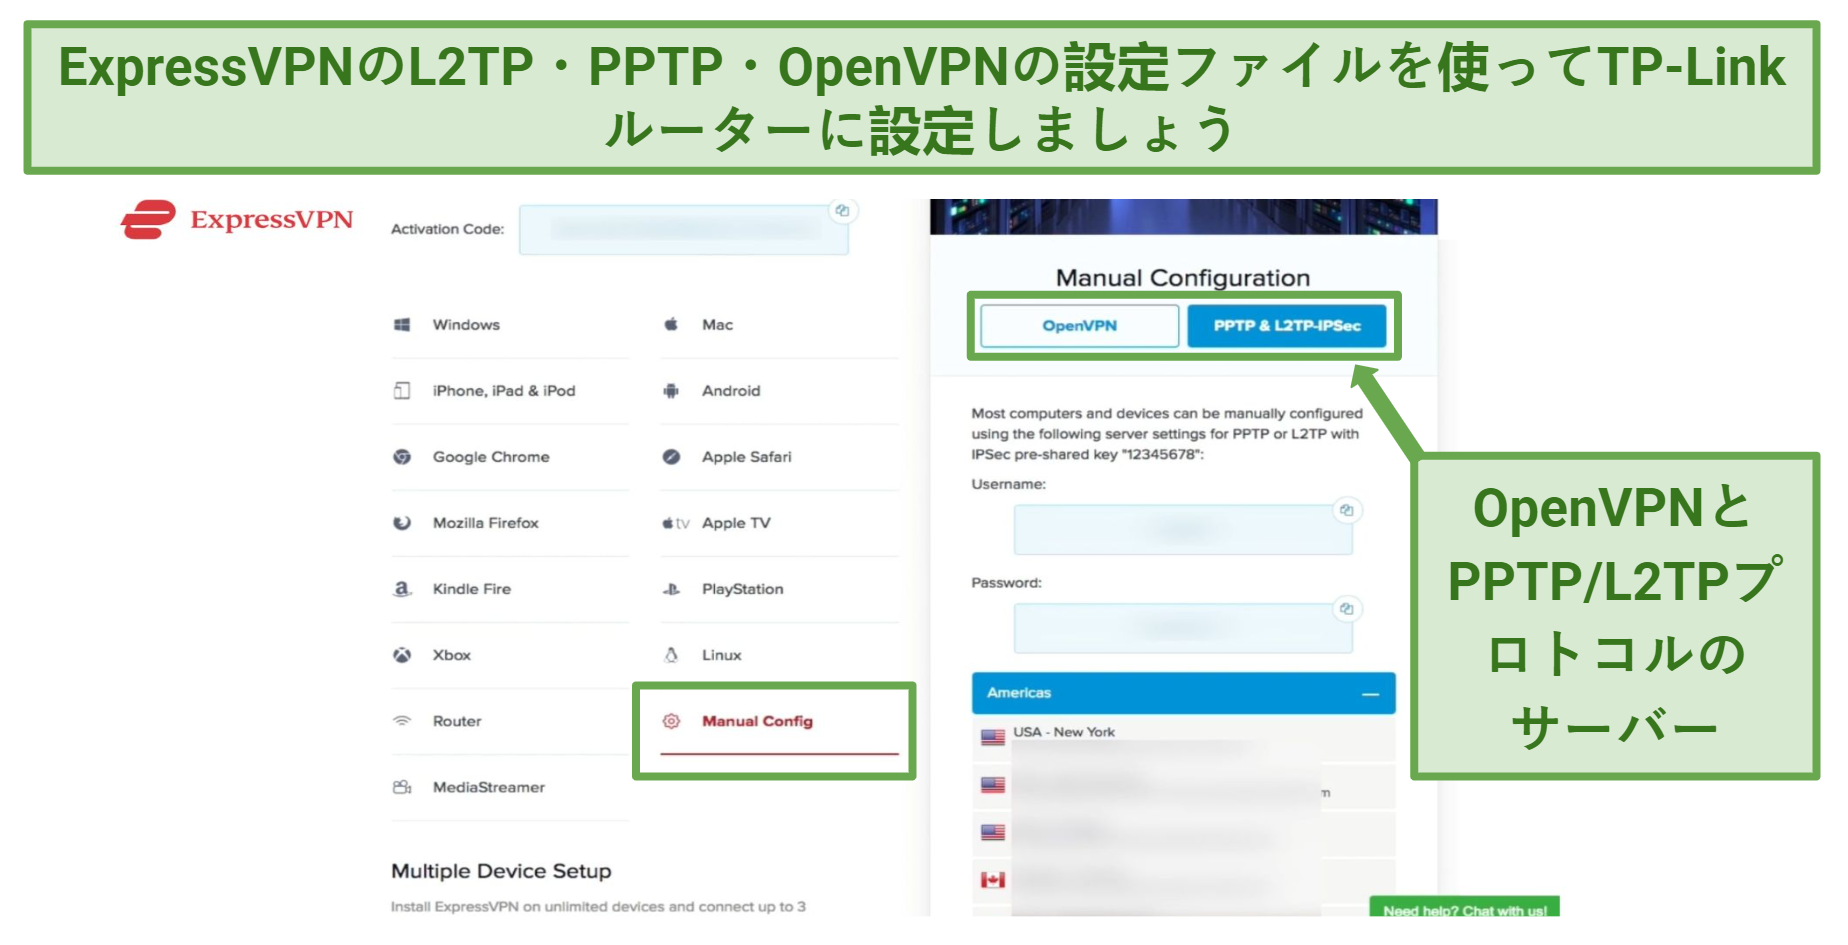 Image of ExpressVPN's OpenVPN and PPTP/IPSec servers for routers